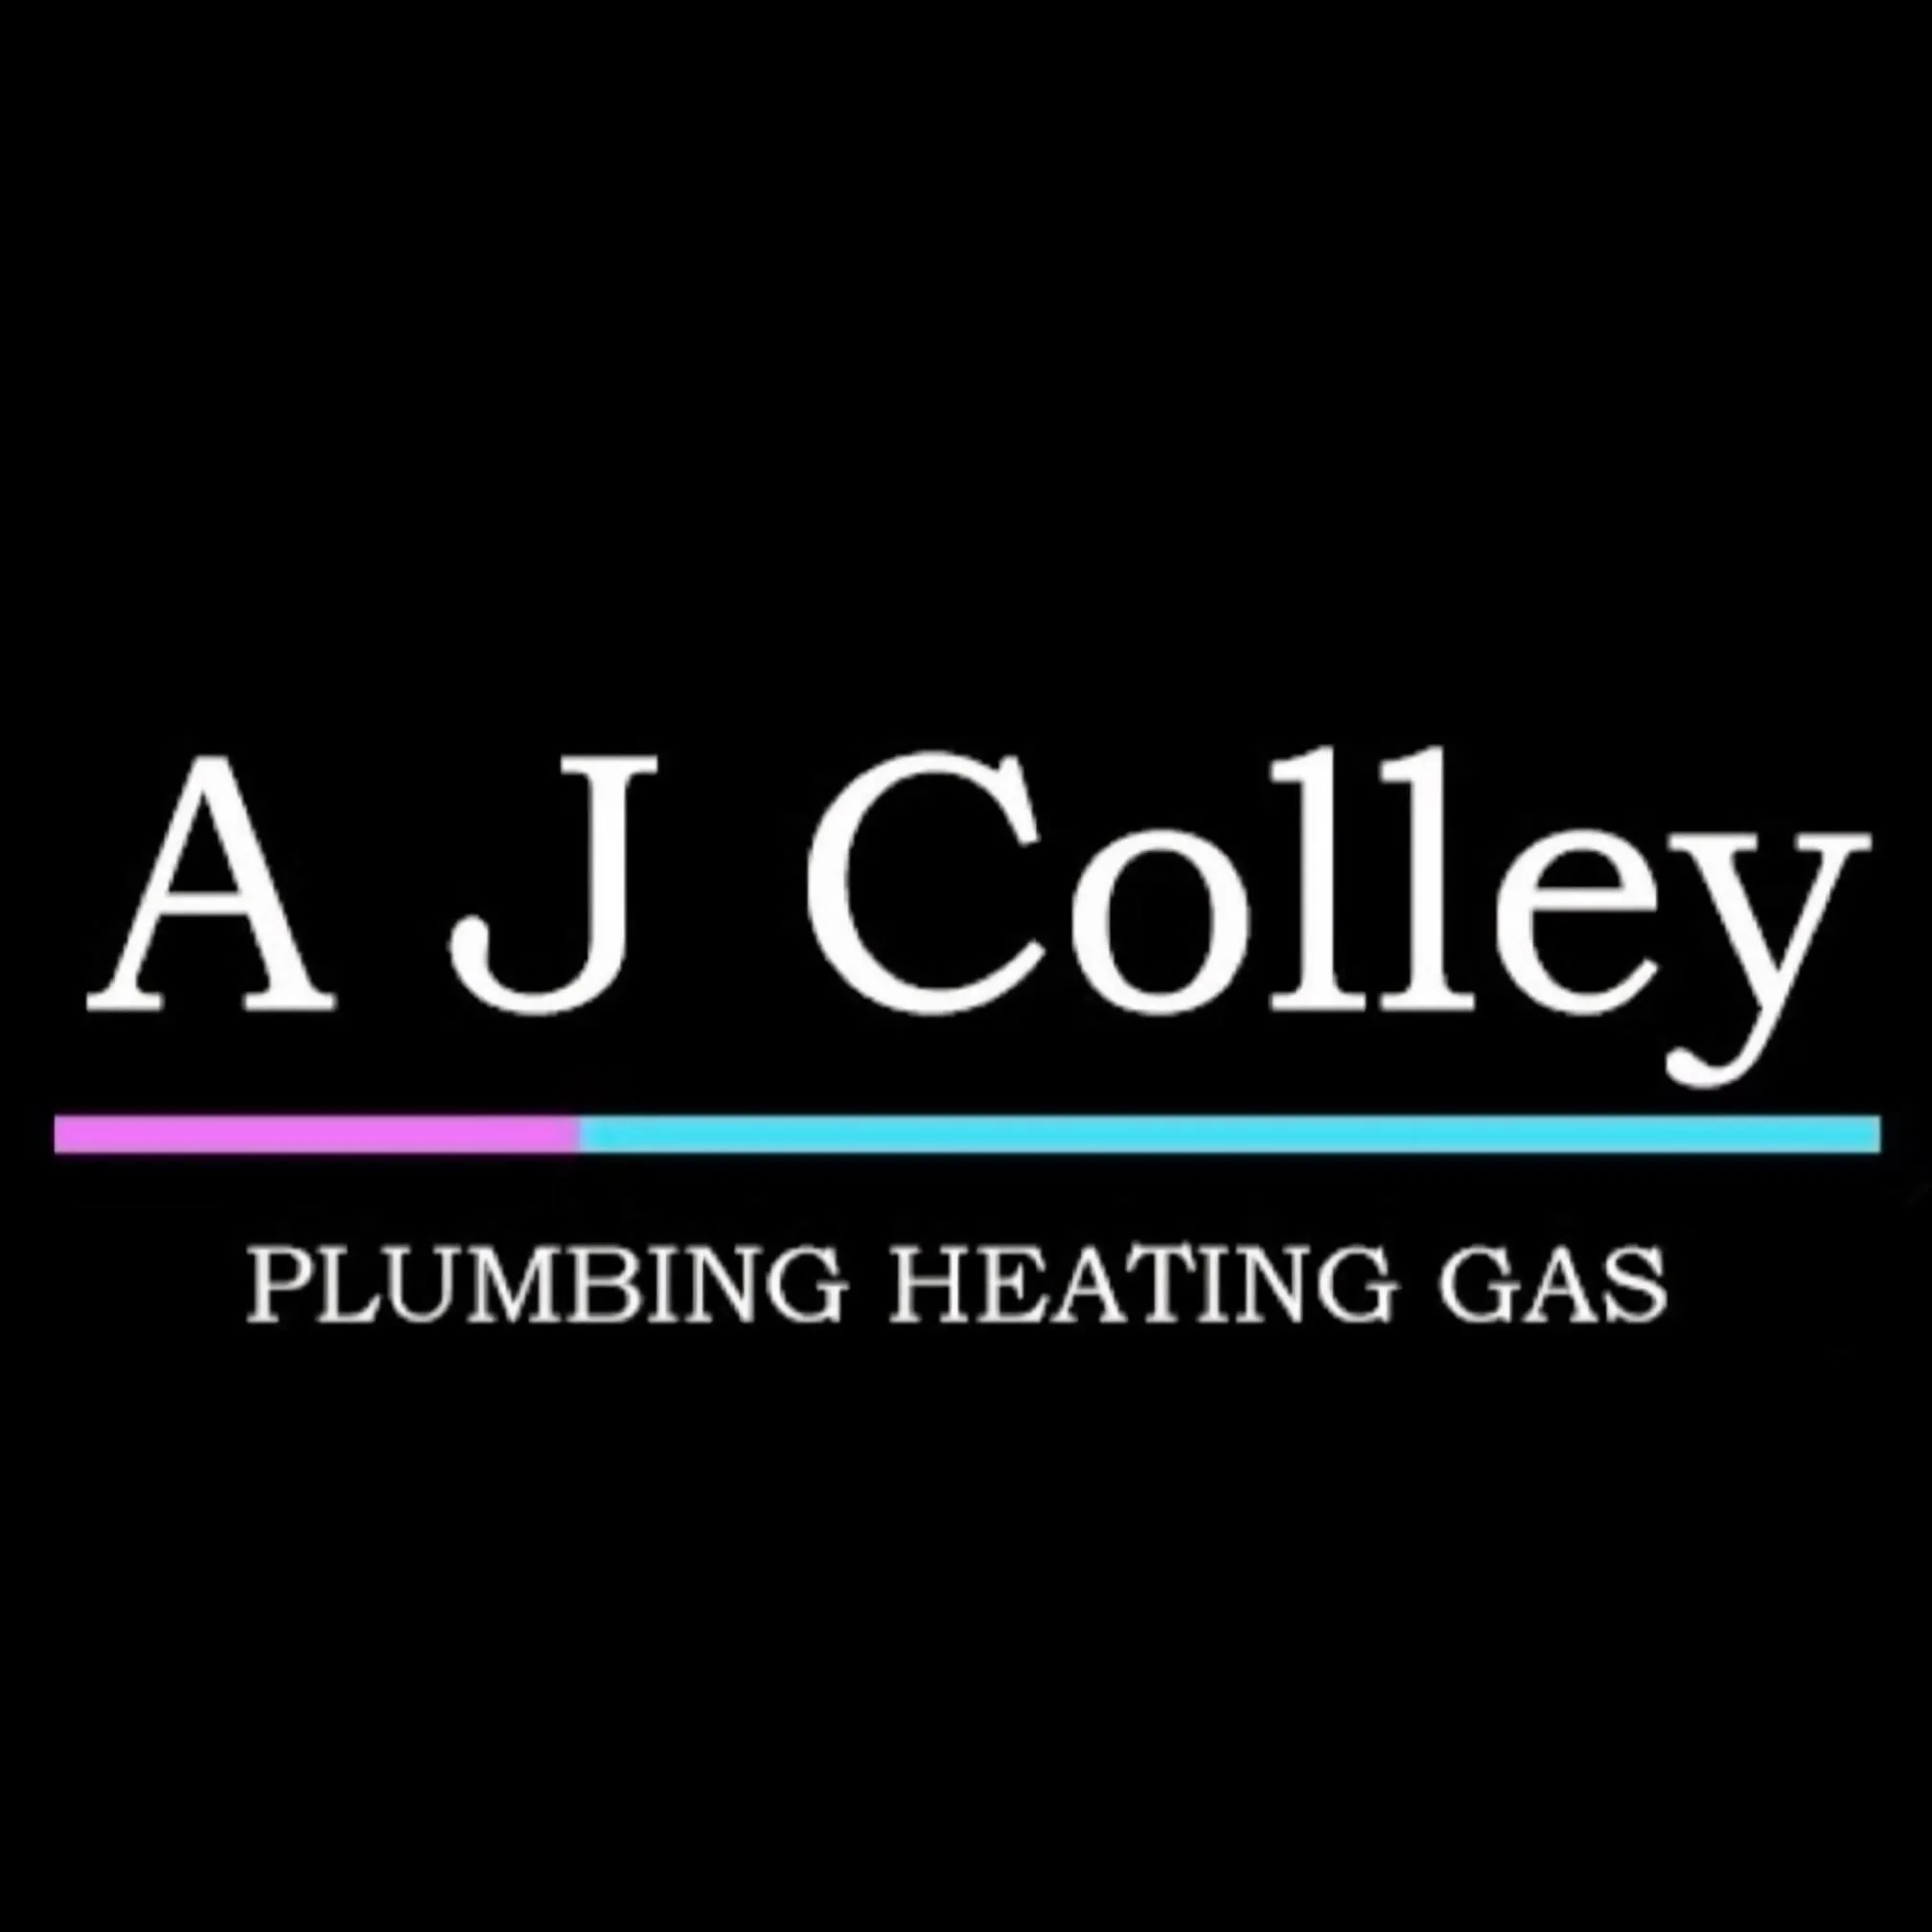 A J Colley Plumbing Heating Gas - Whitstable, Kent CT5 1PP - 07886 001549 | ShowMeLocal.com